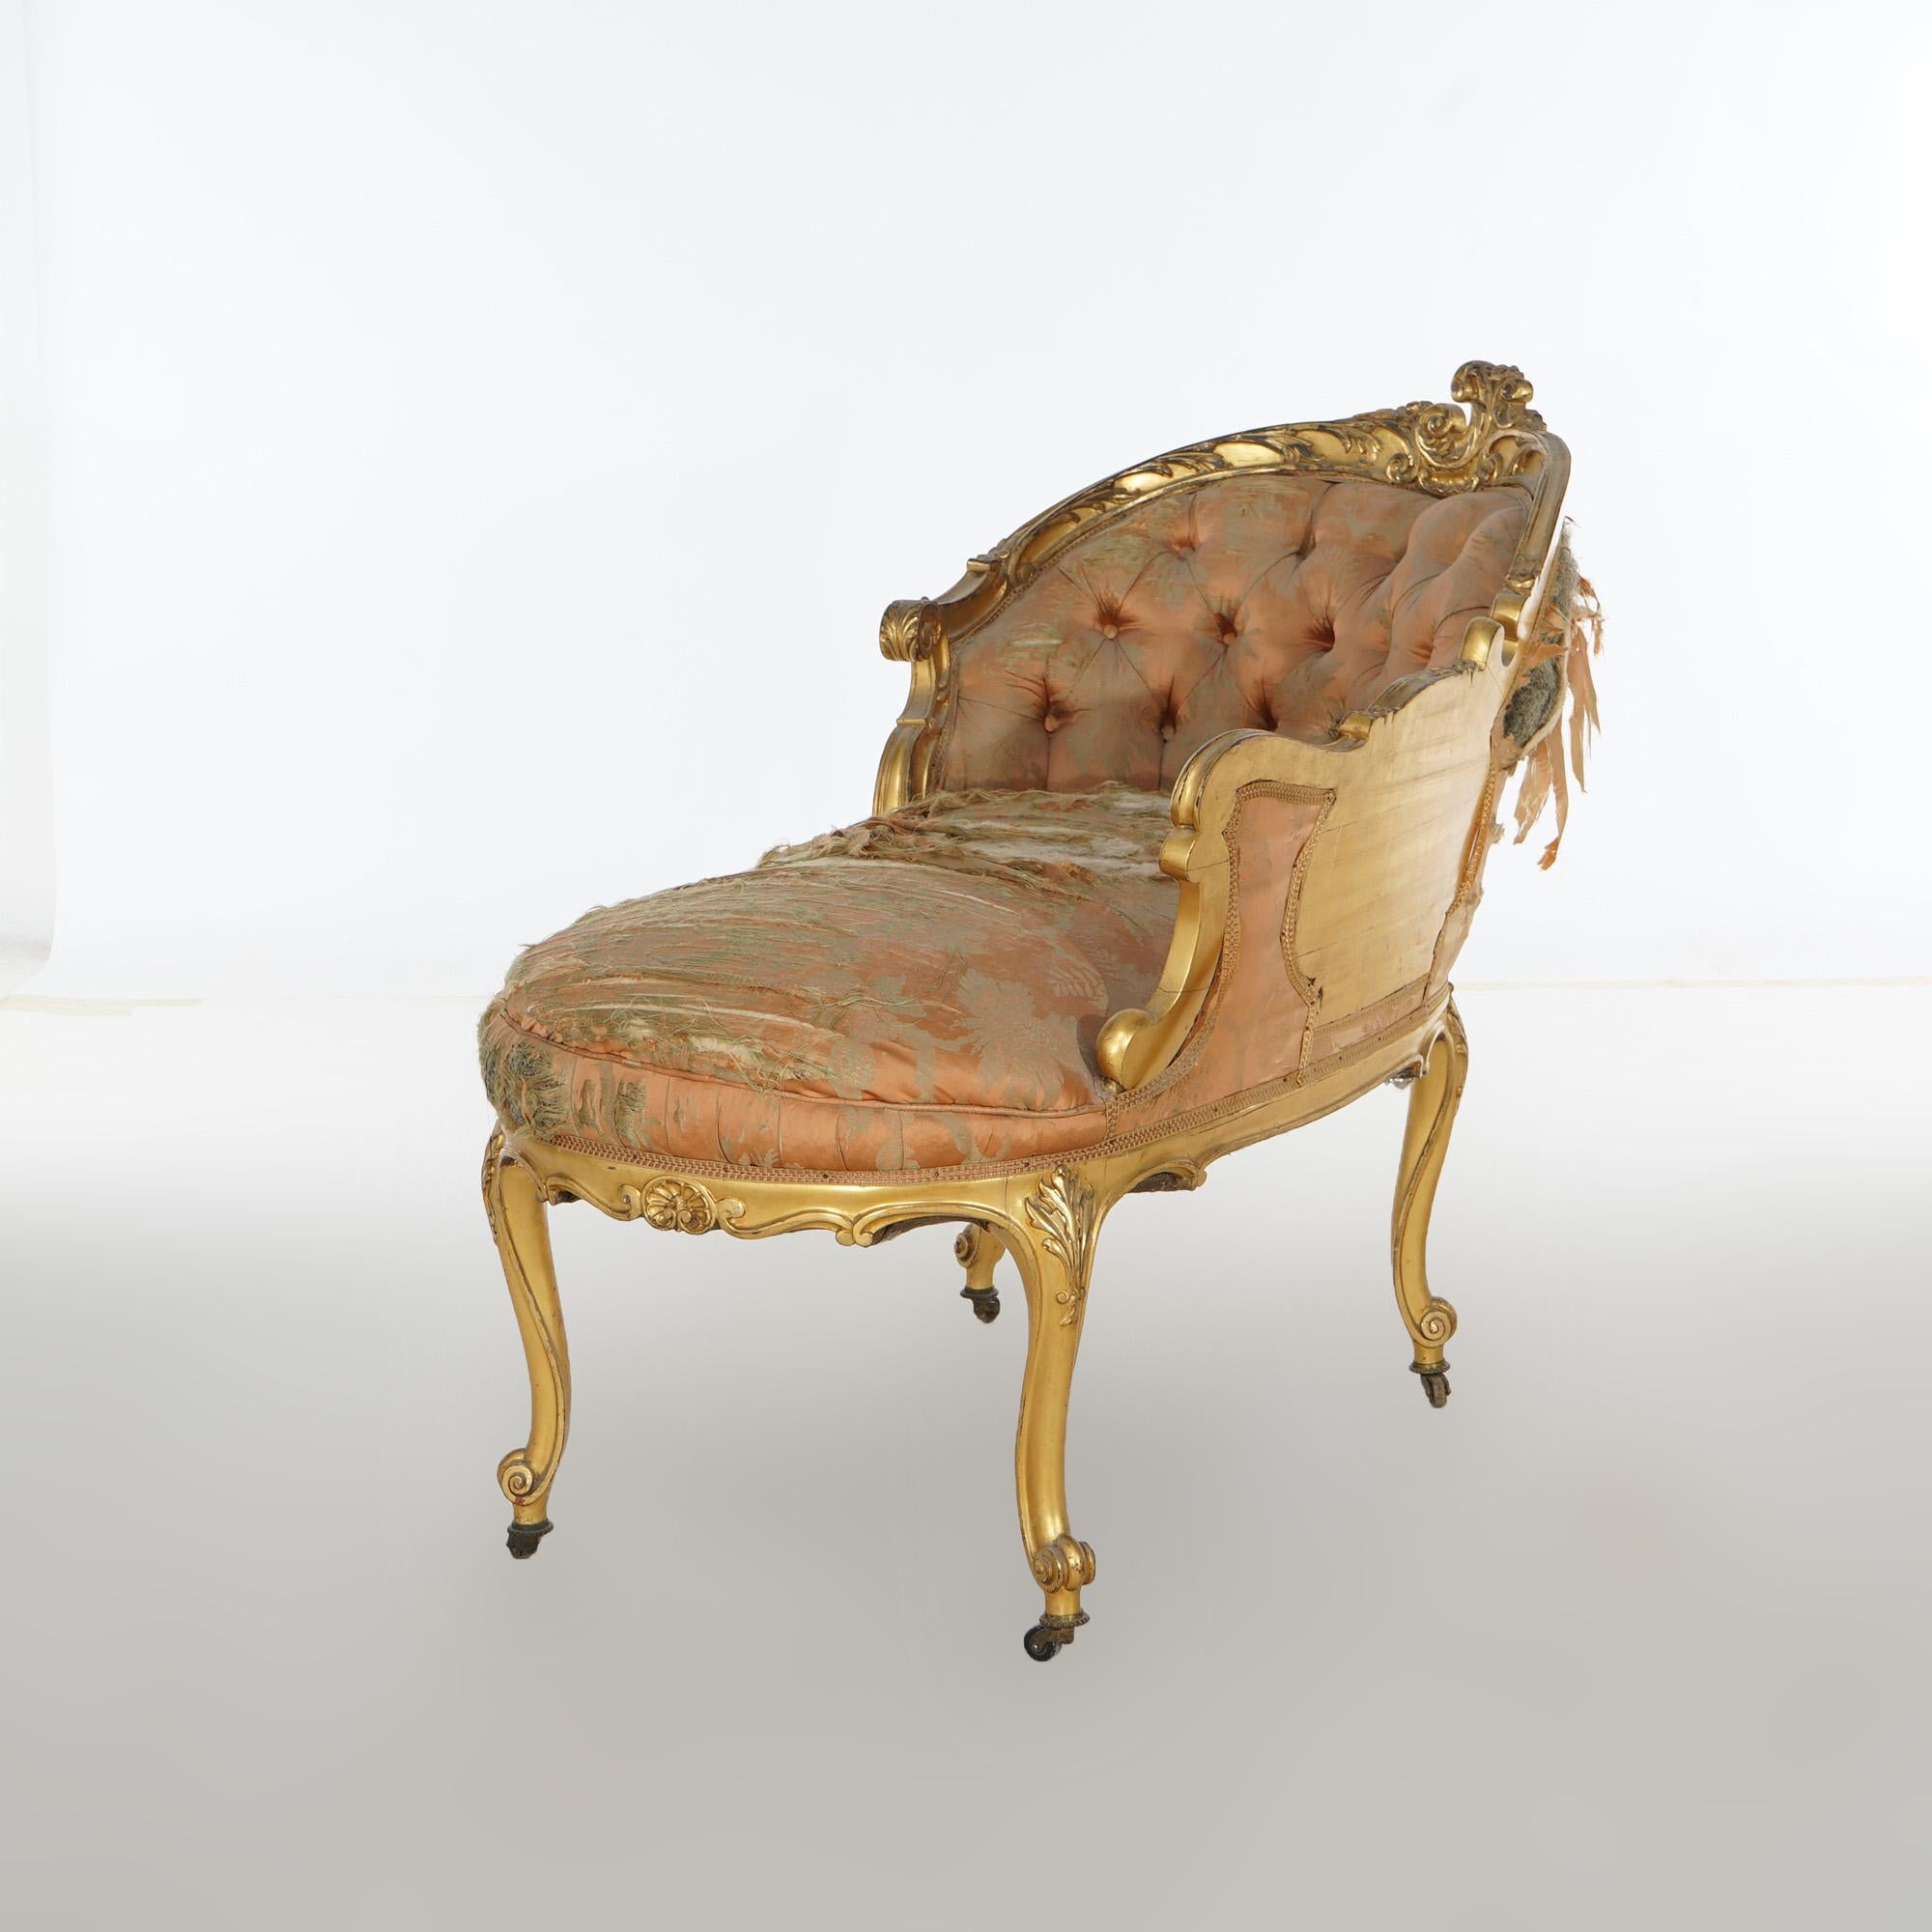 Early Antique French Rococo Vernis Martin & Giltwood Half-Recamier Settee 19th C For Sale 8